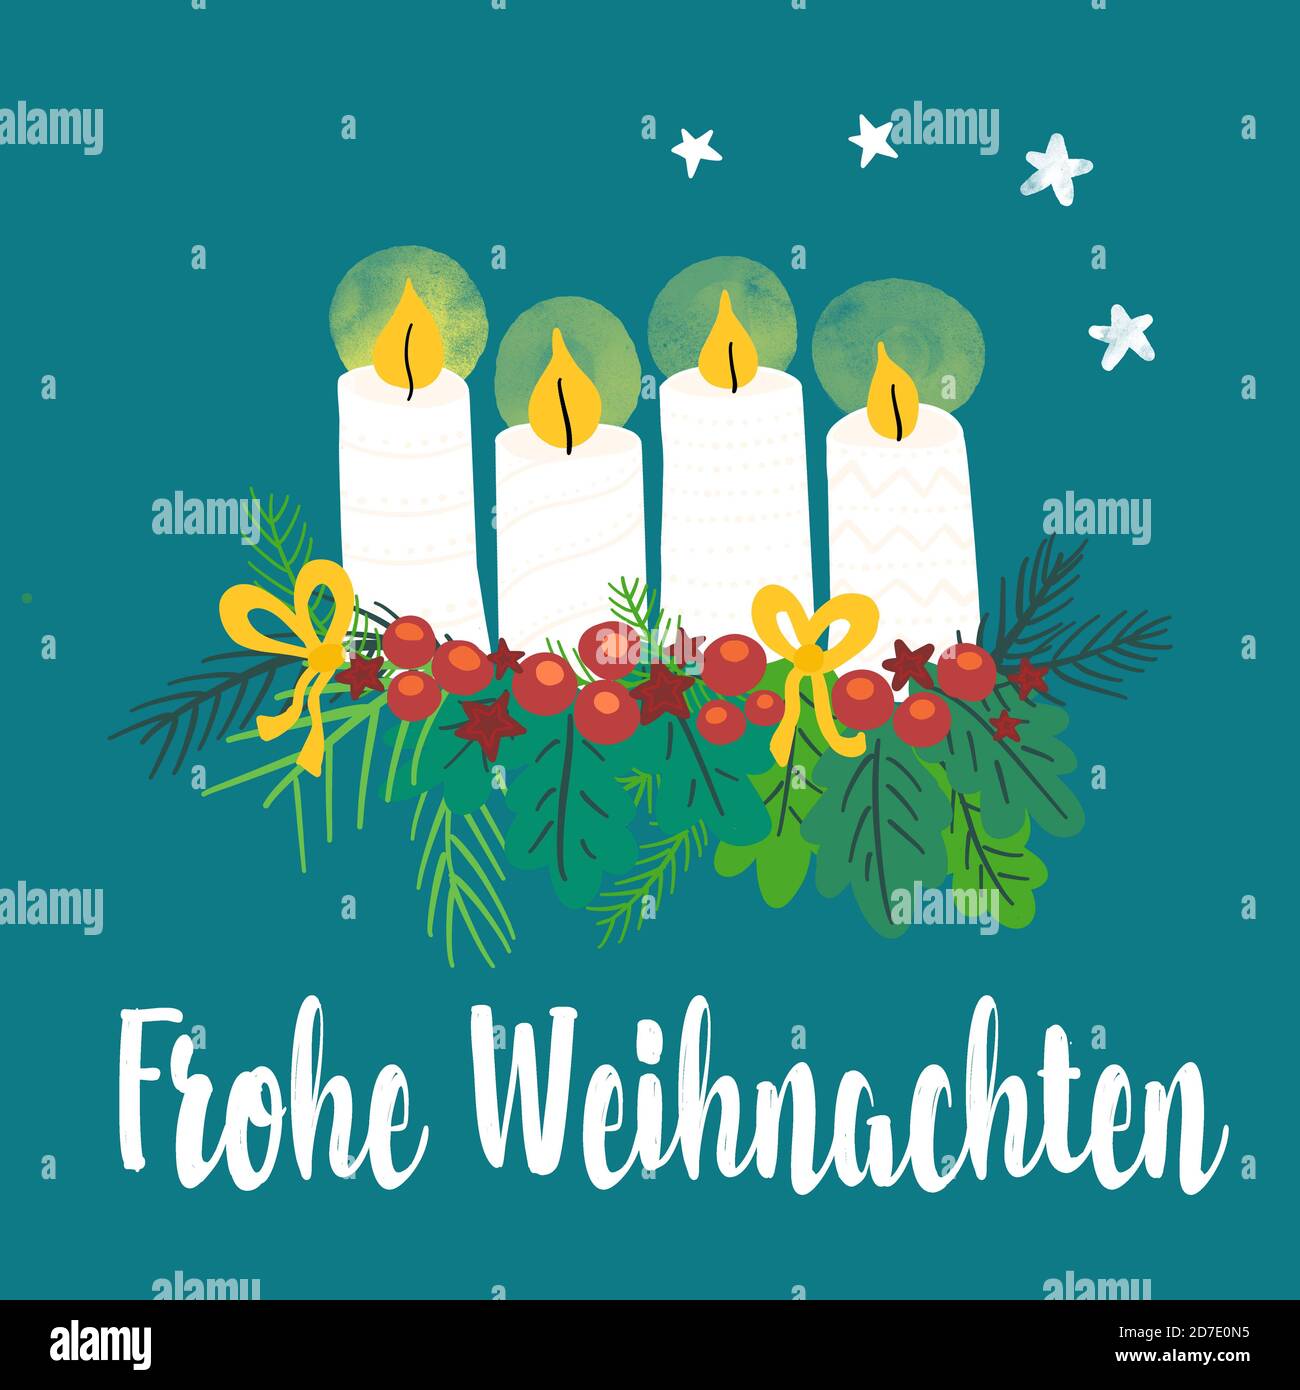 Merry Christmas circular Advent wreath with bows and berries and pine branches. German holiday tradition Stock Photo